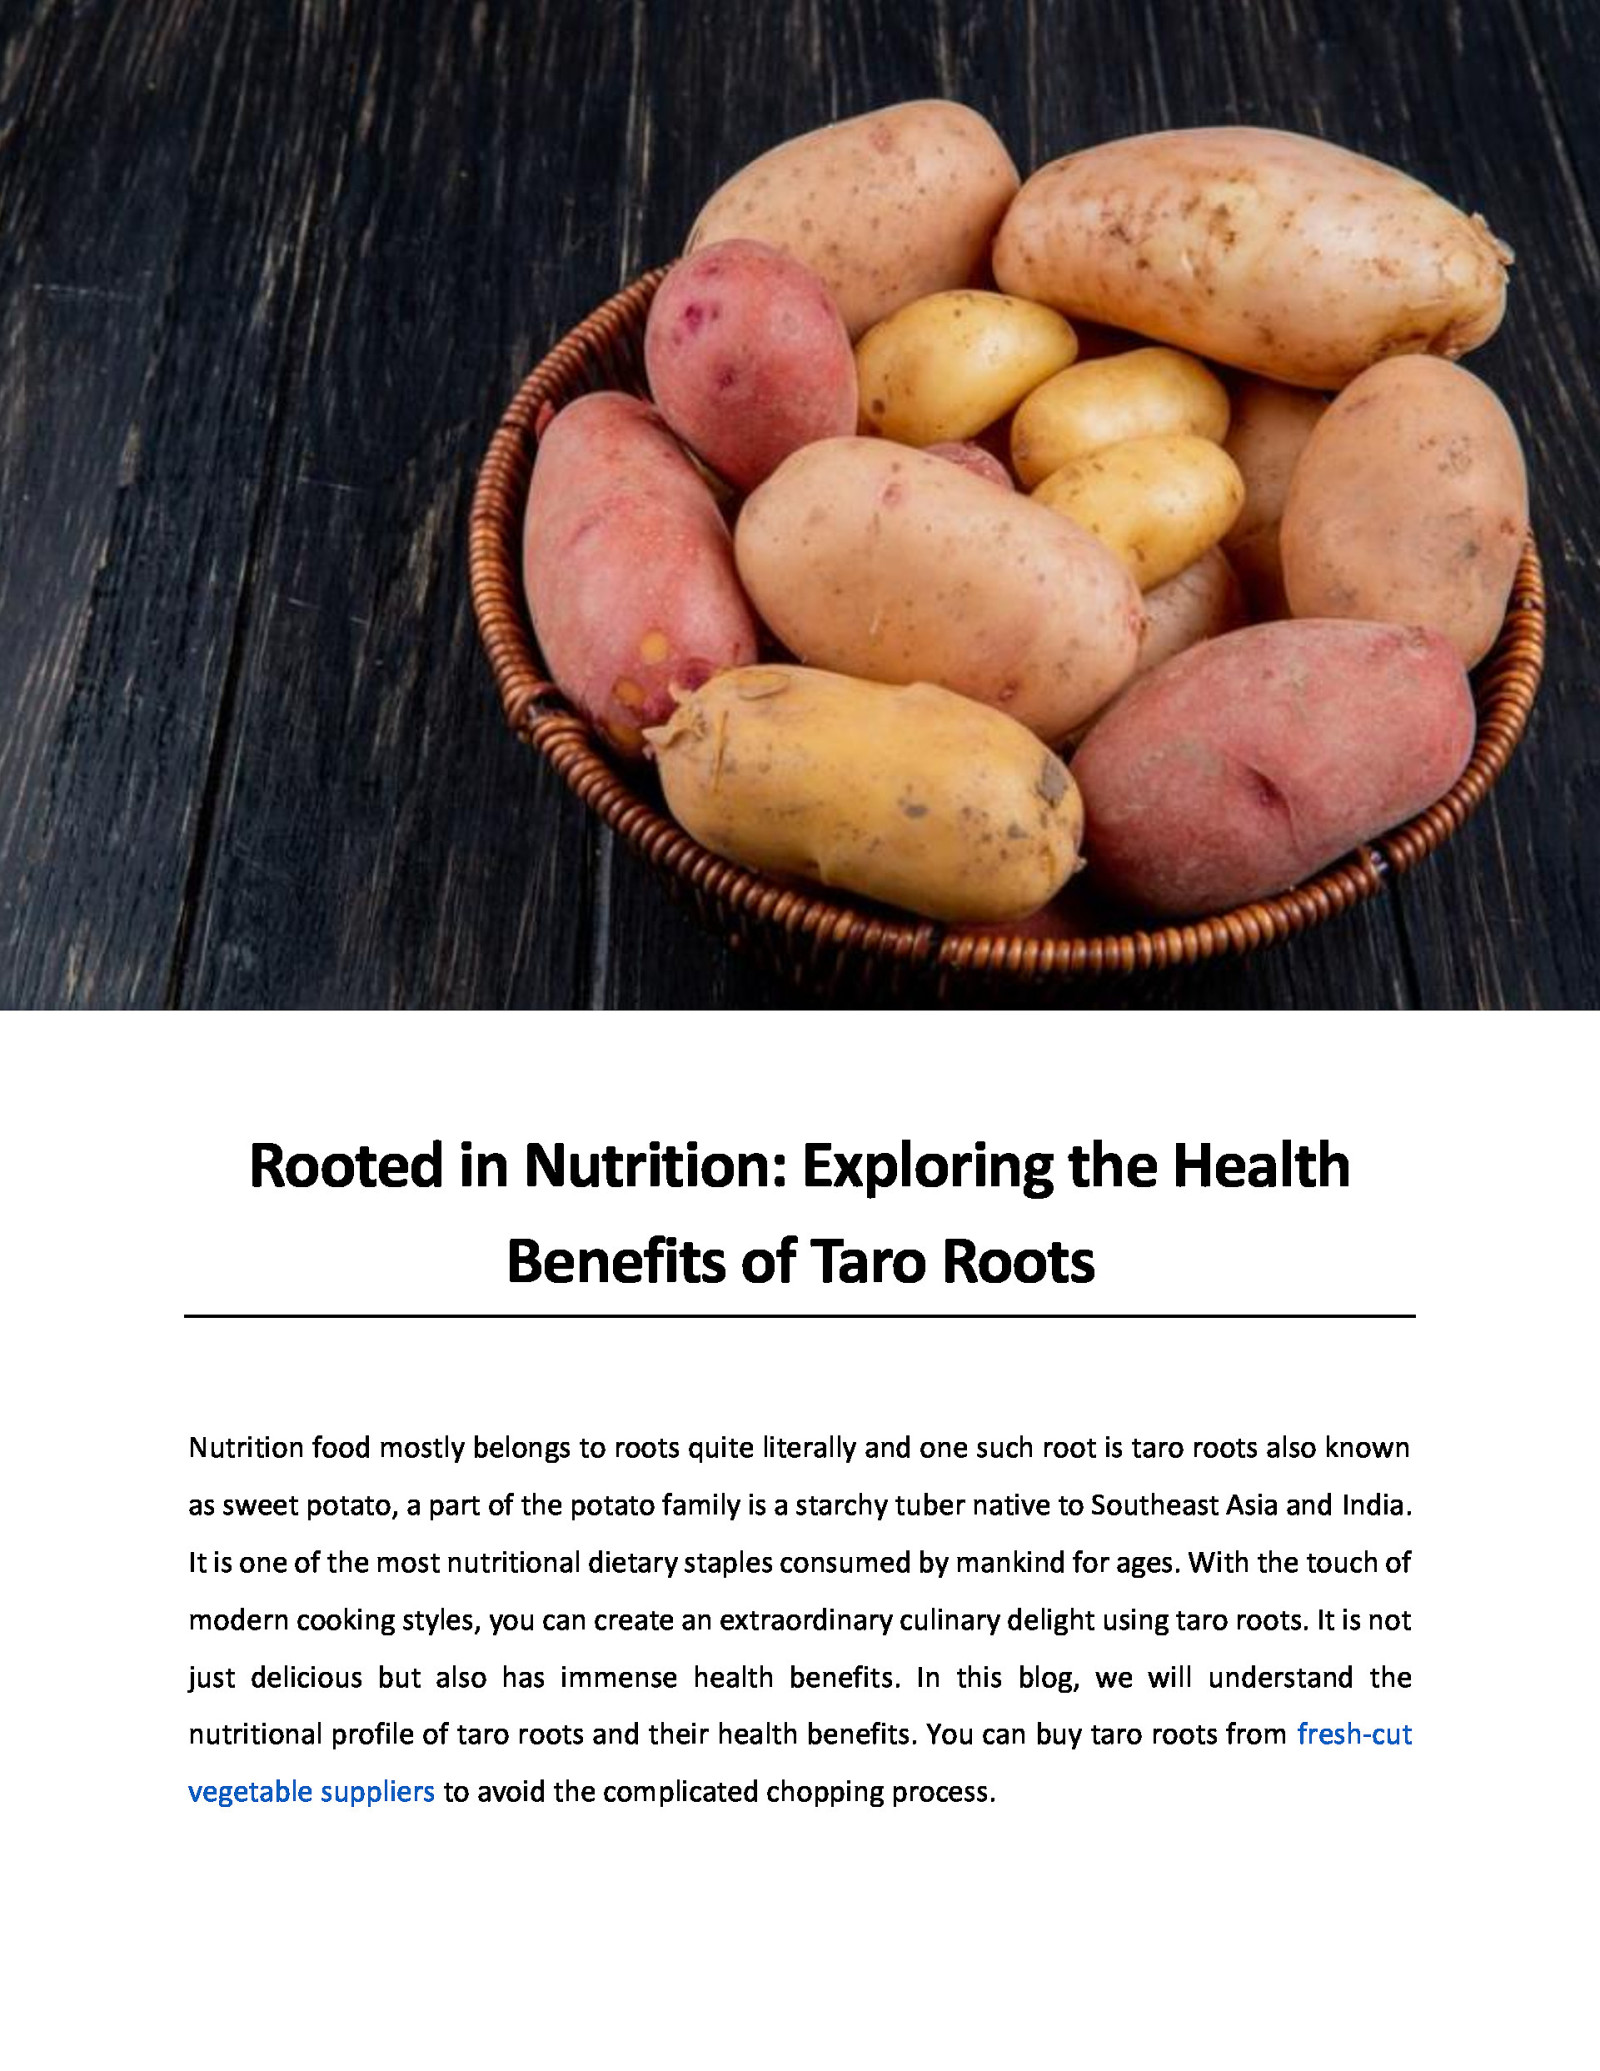 Rooted in Nutrition: Exploring the Health Benefits of Taro Roots